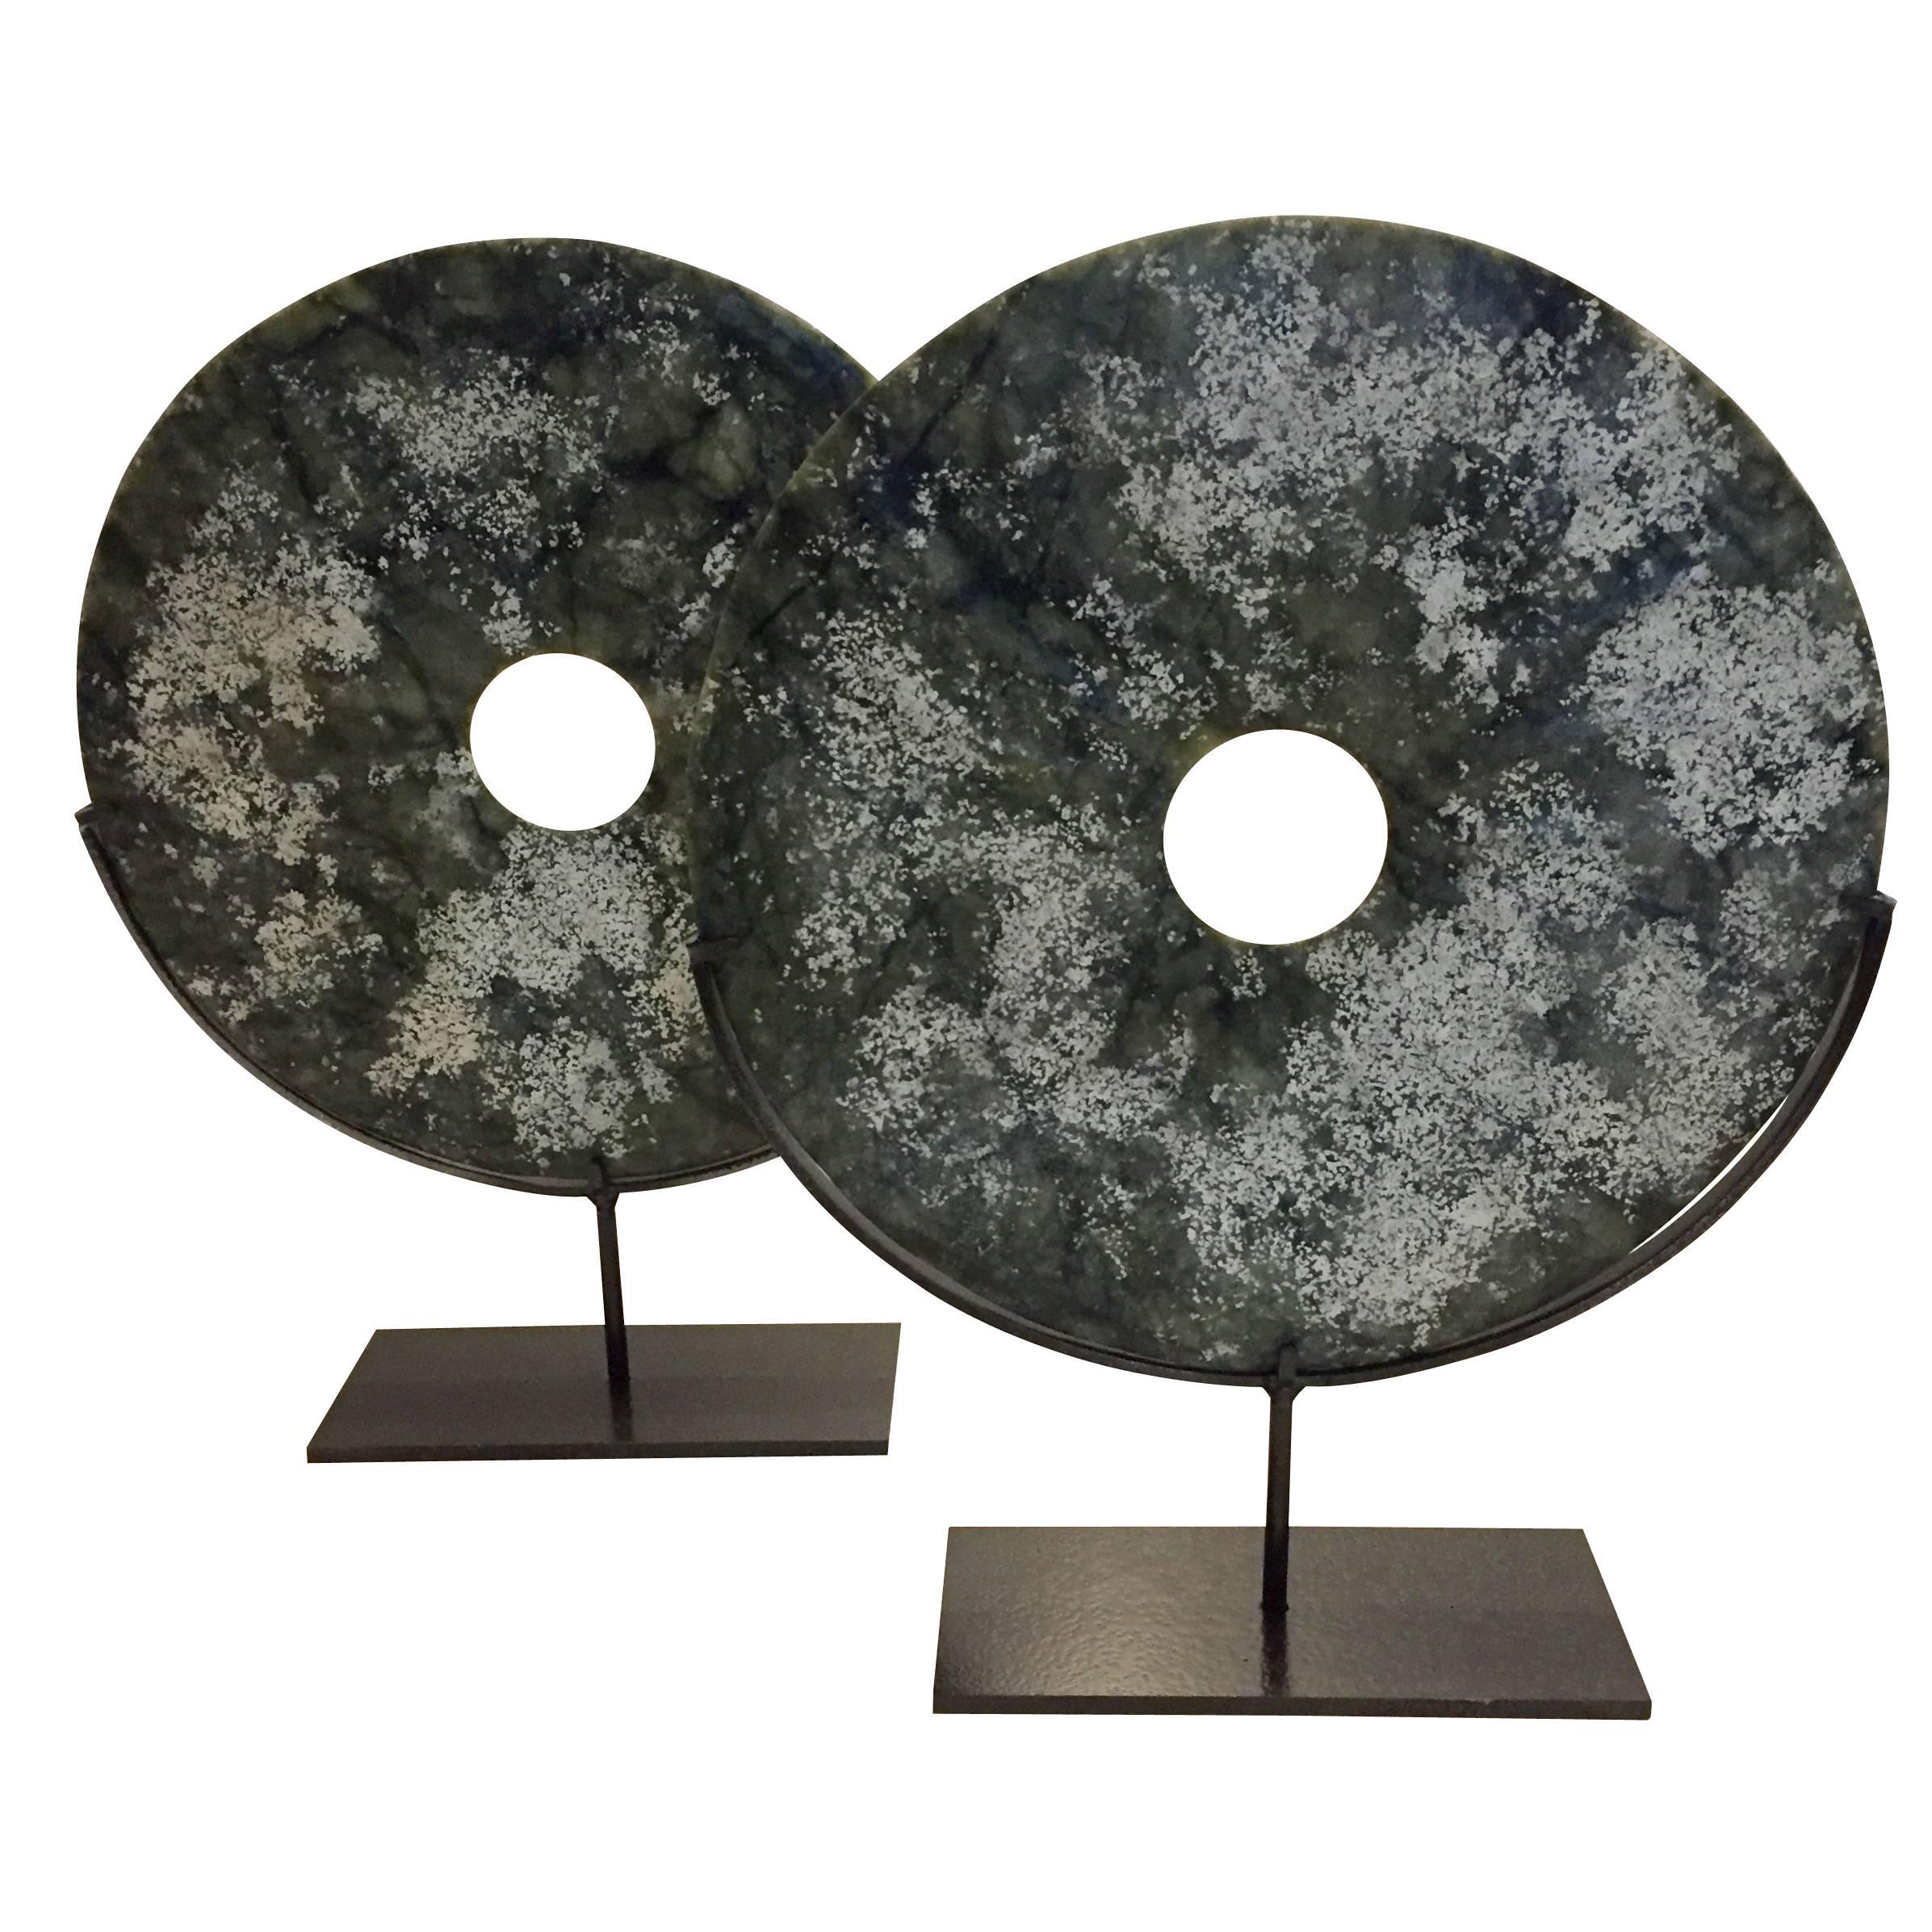 Pair Green and White Textured Disc Sculptures, Contemporary, China